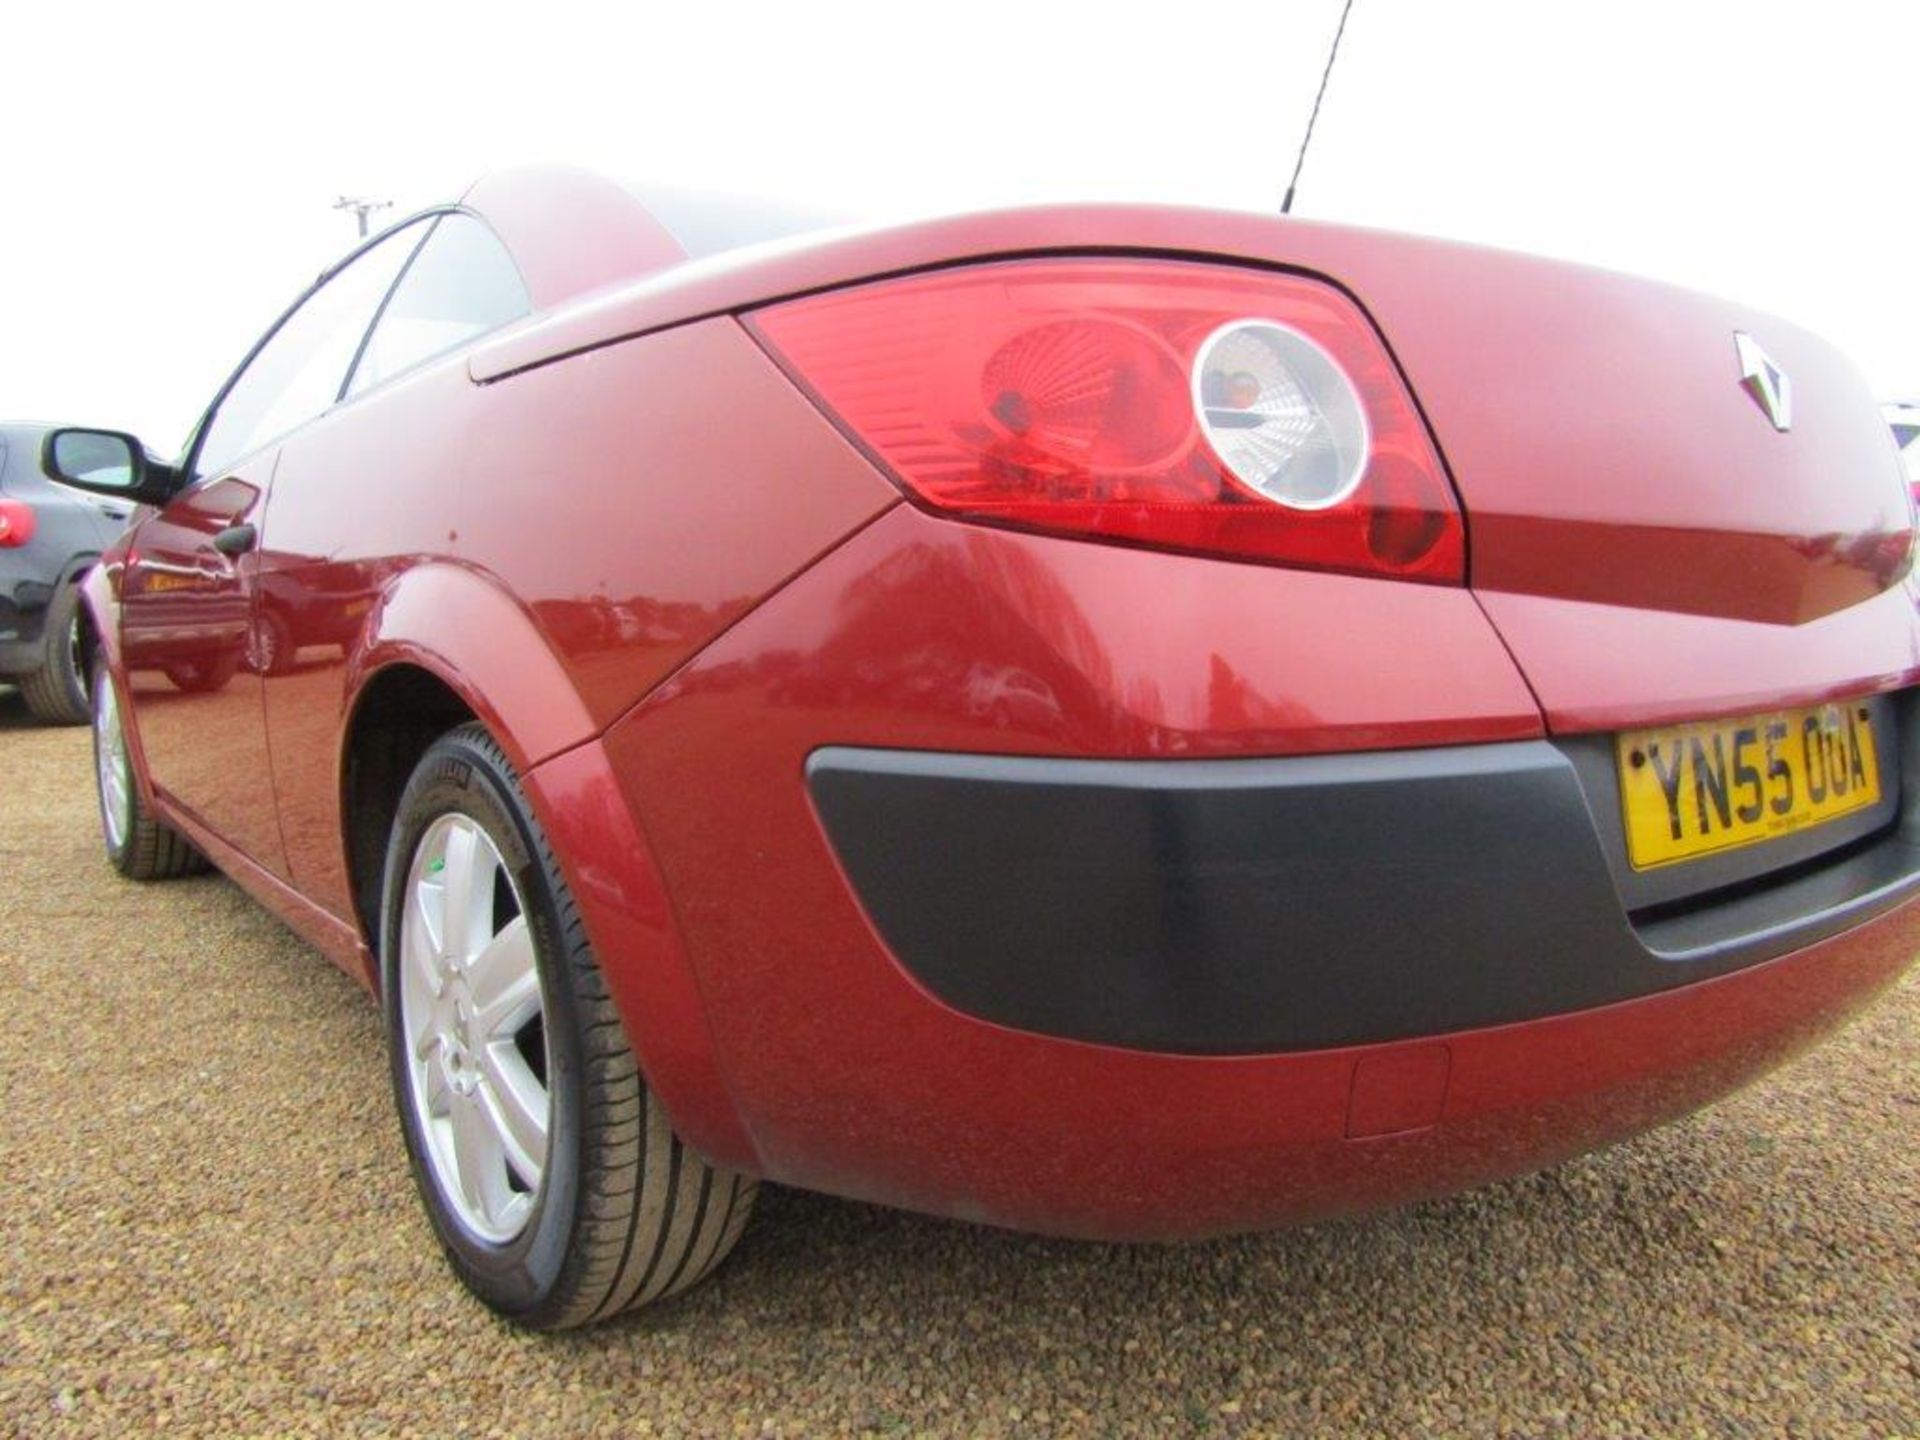 55 05 Renault Megane Coupe - Image 11 of 18